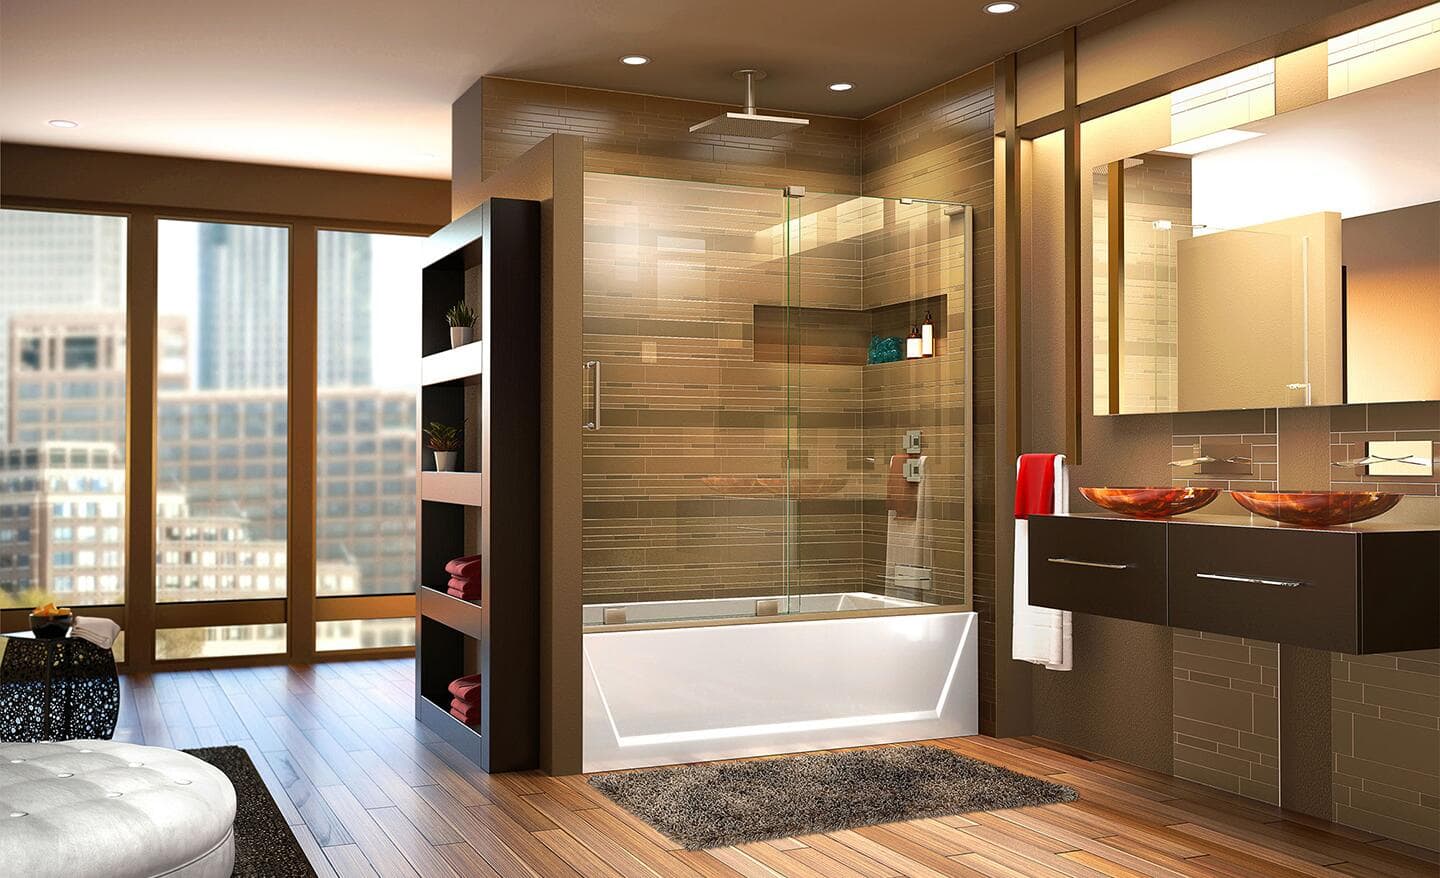 A bathroom with a shower tub combo that has glass sliding shower doors.